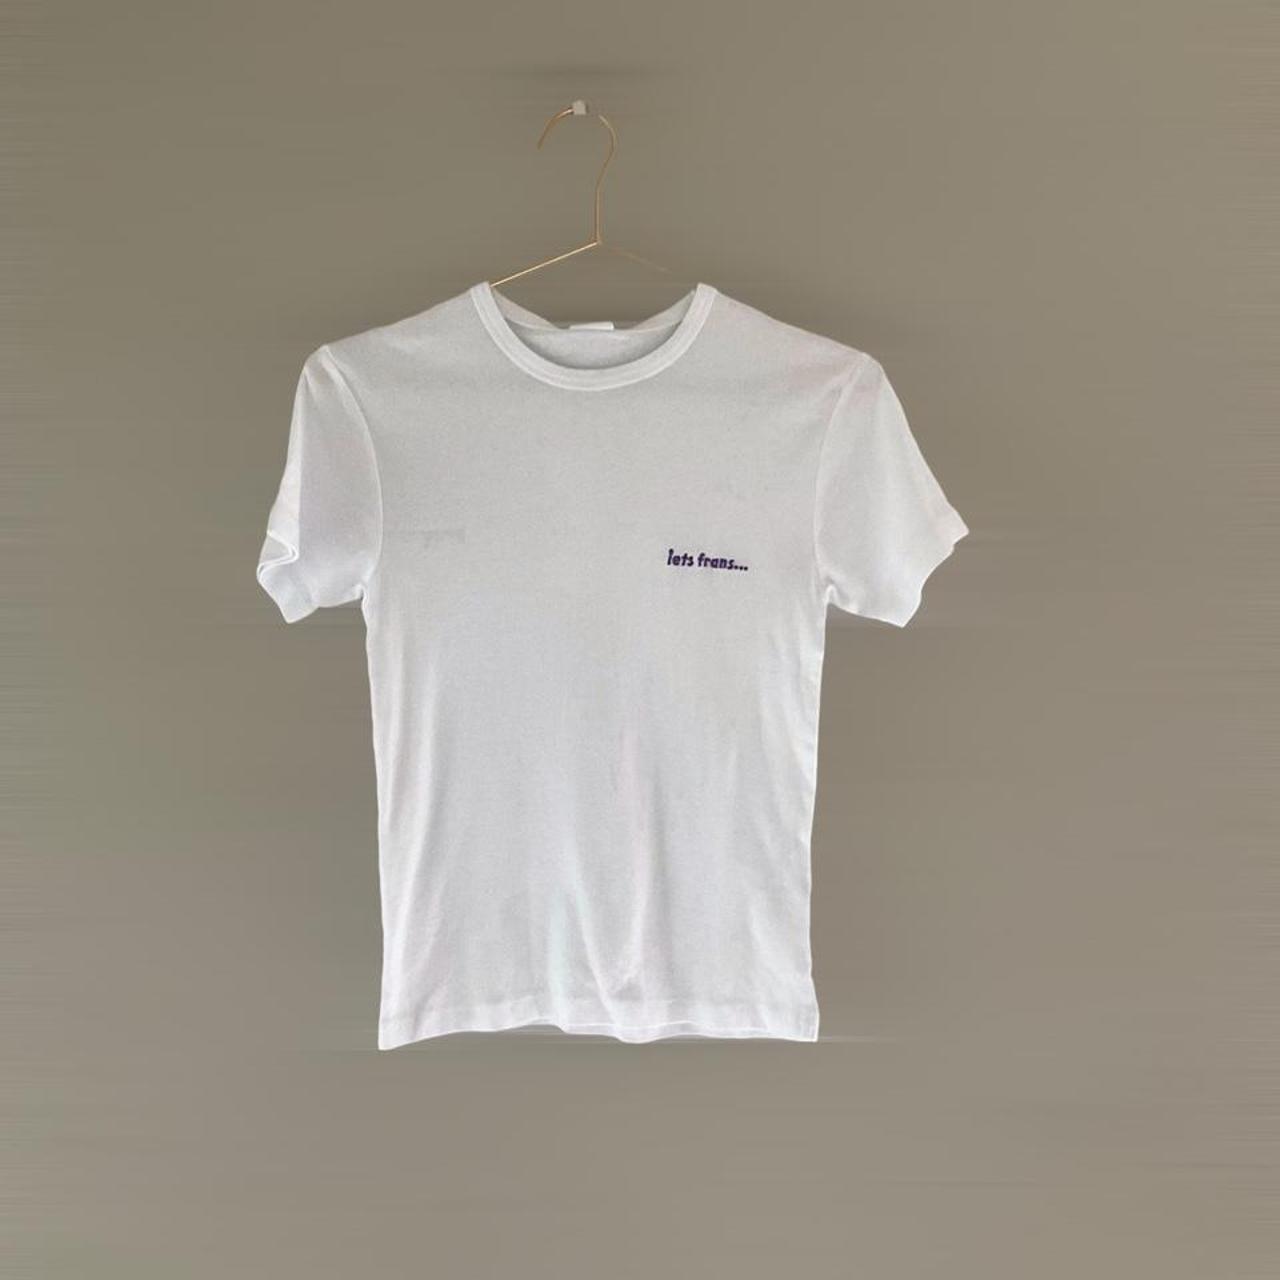 Urban Outfitters Iets Frans women’s basic white T... - Depop